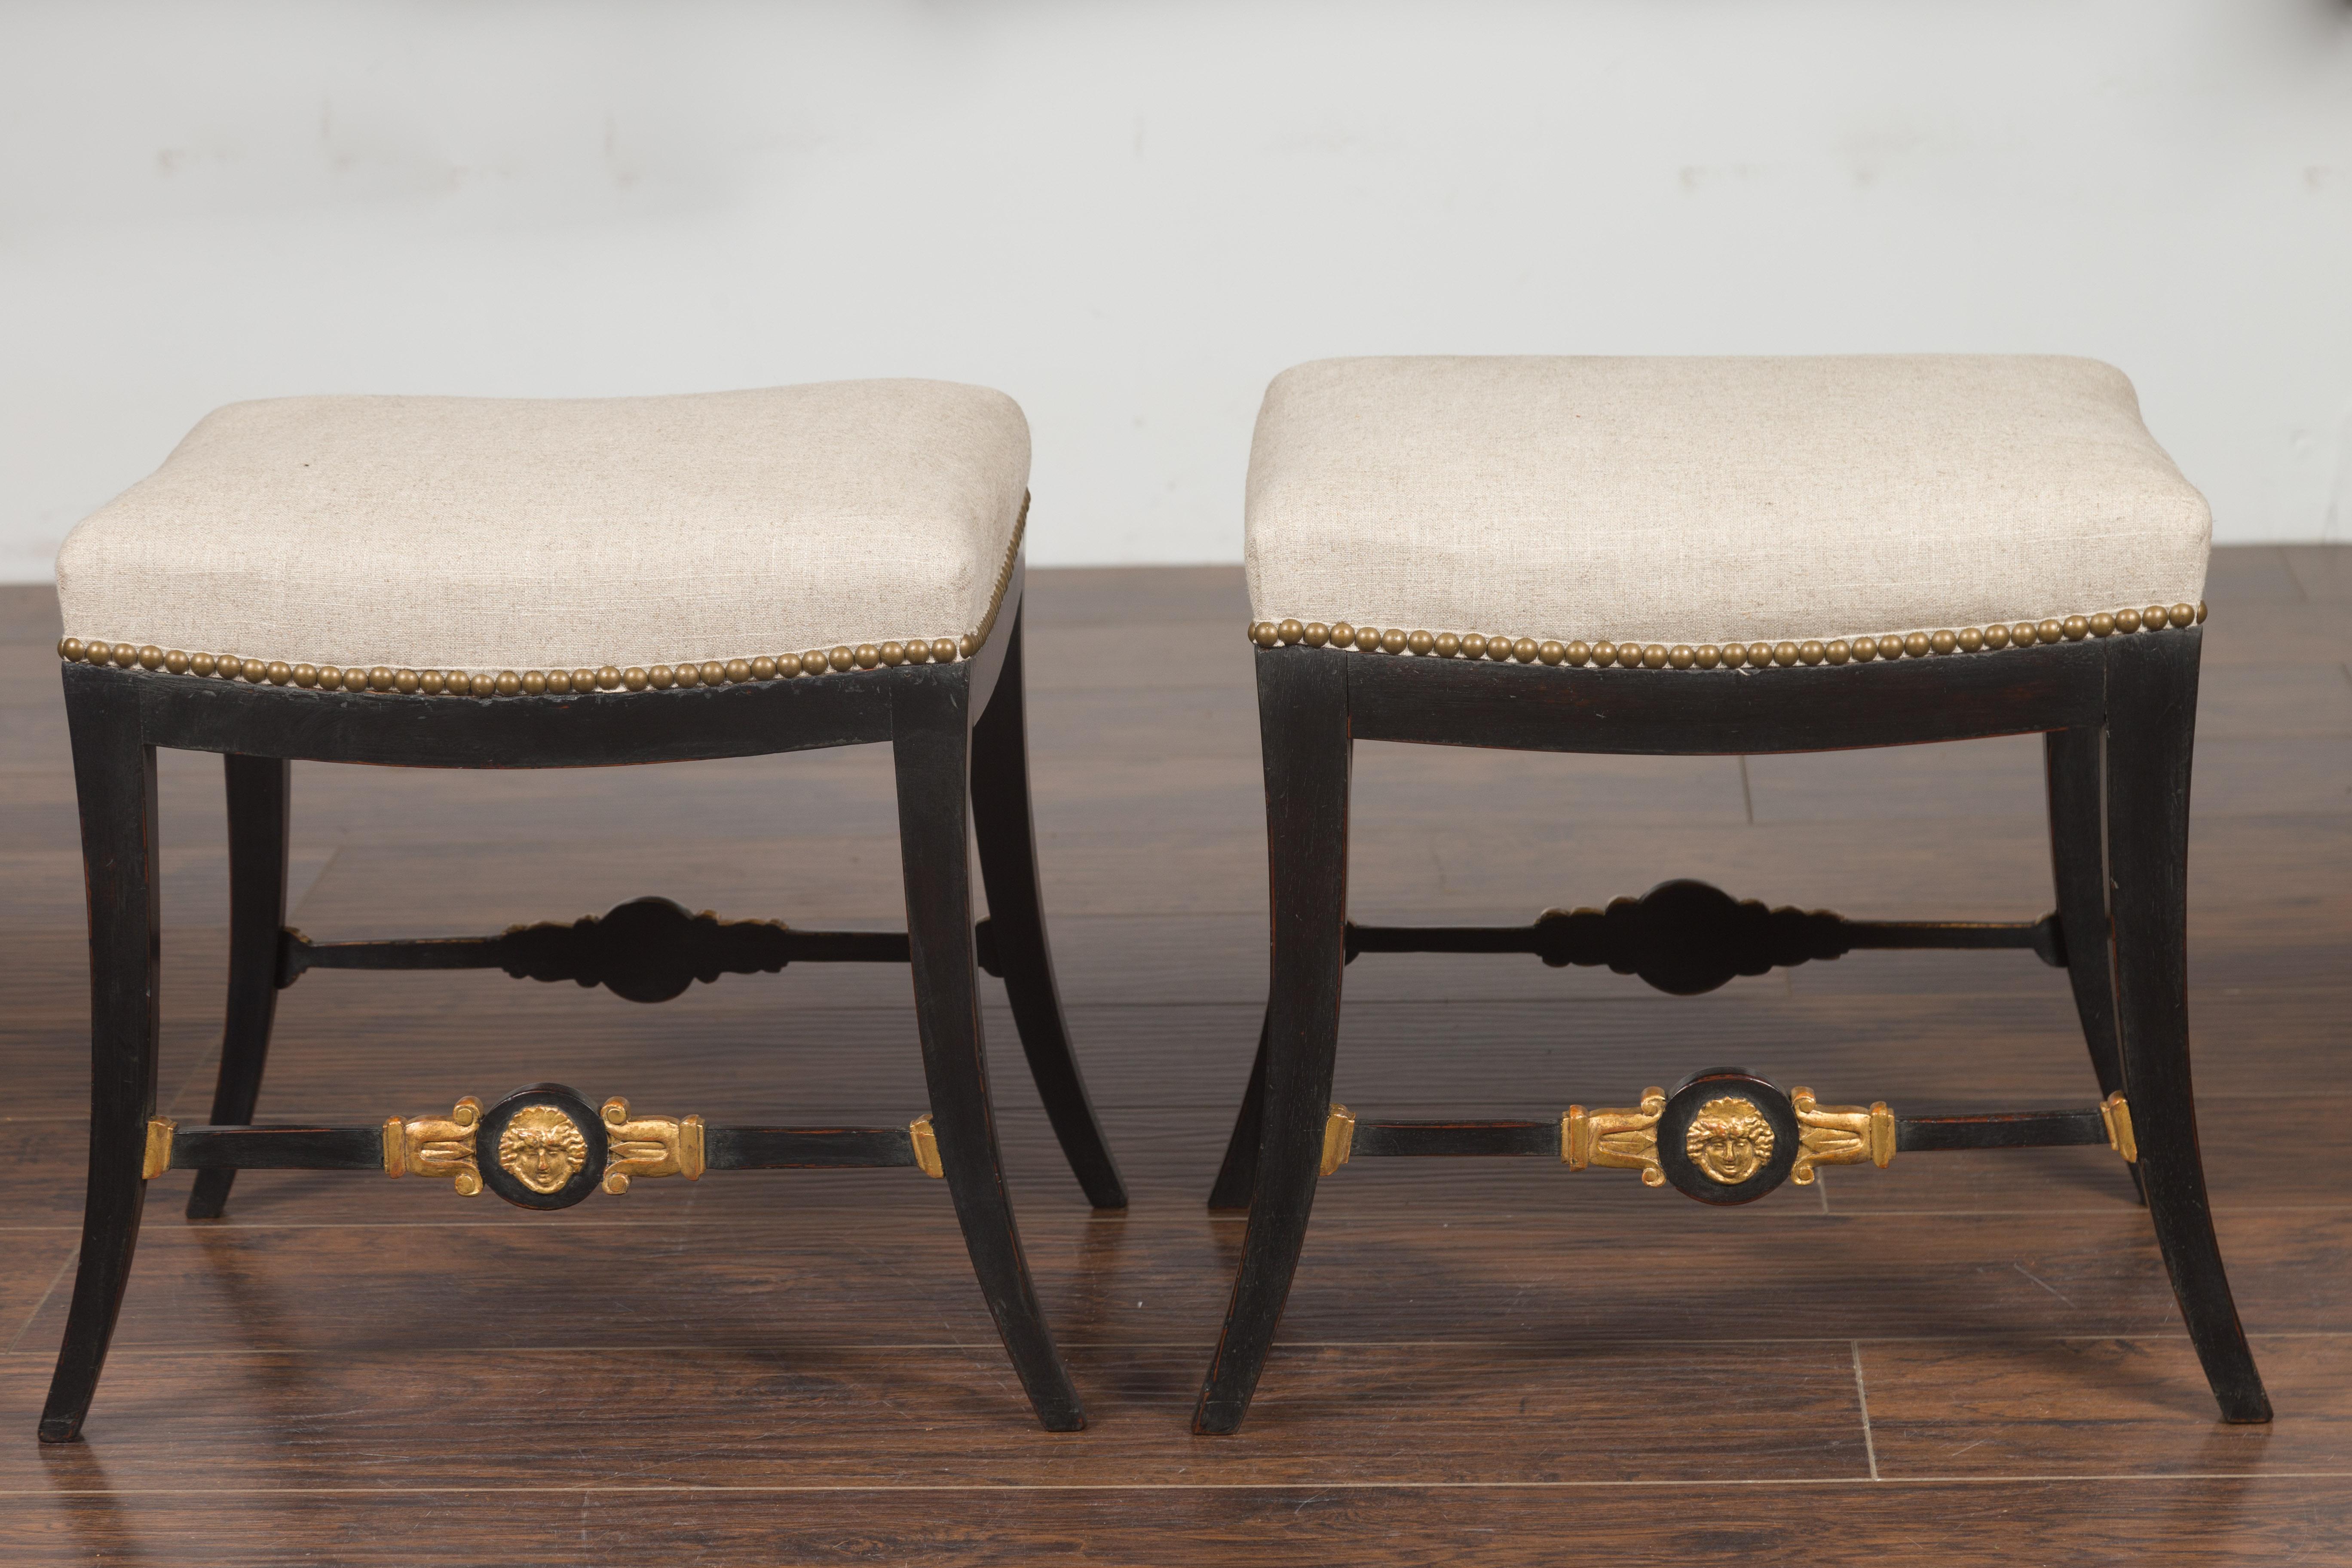 Pair of English Regency 1820s Ebonized and Gilt Stools with New Upholstery For Sale 7